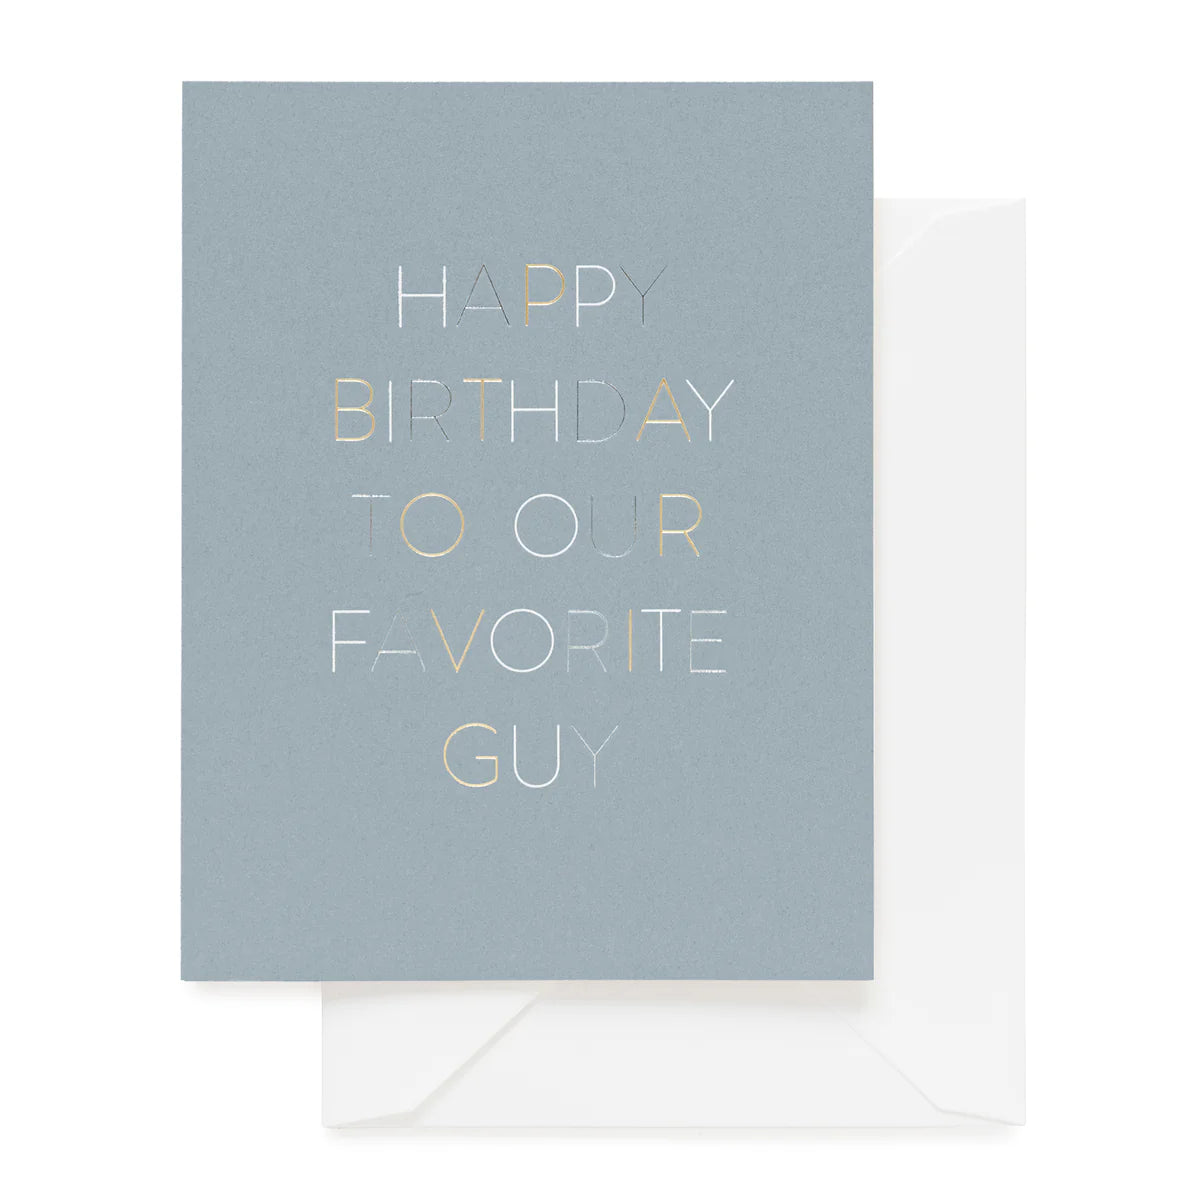 Our Favorite Guy Greeting Card